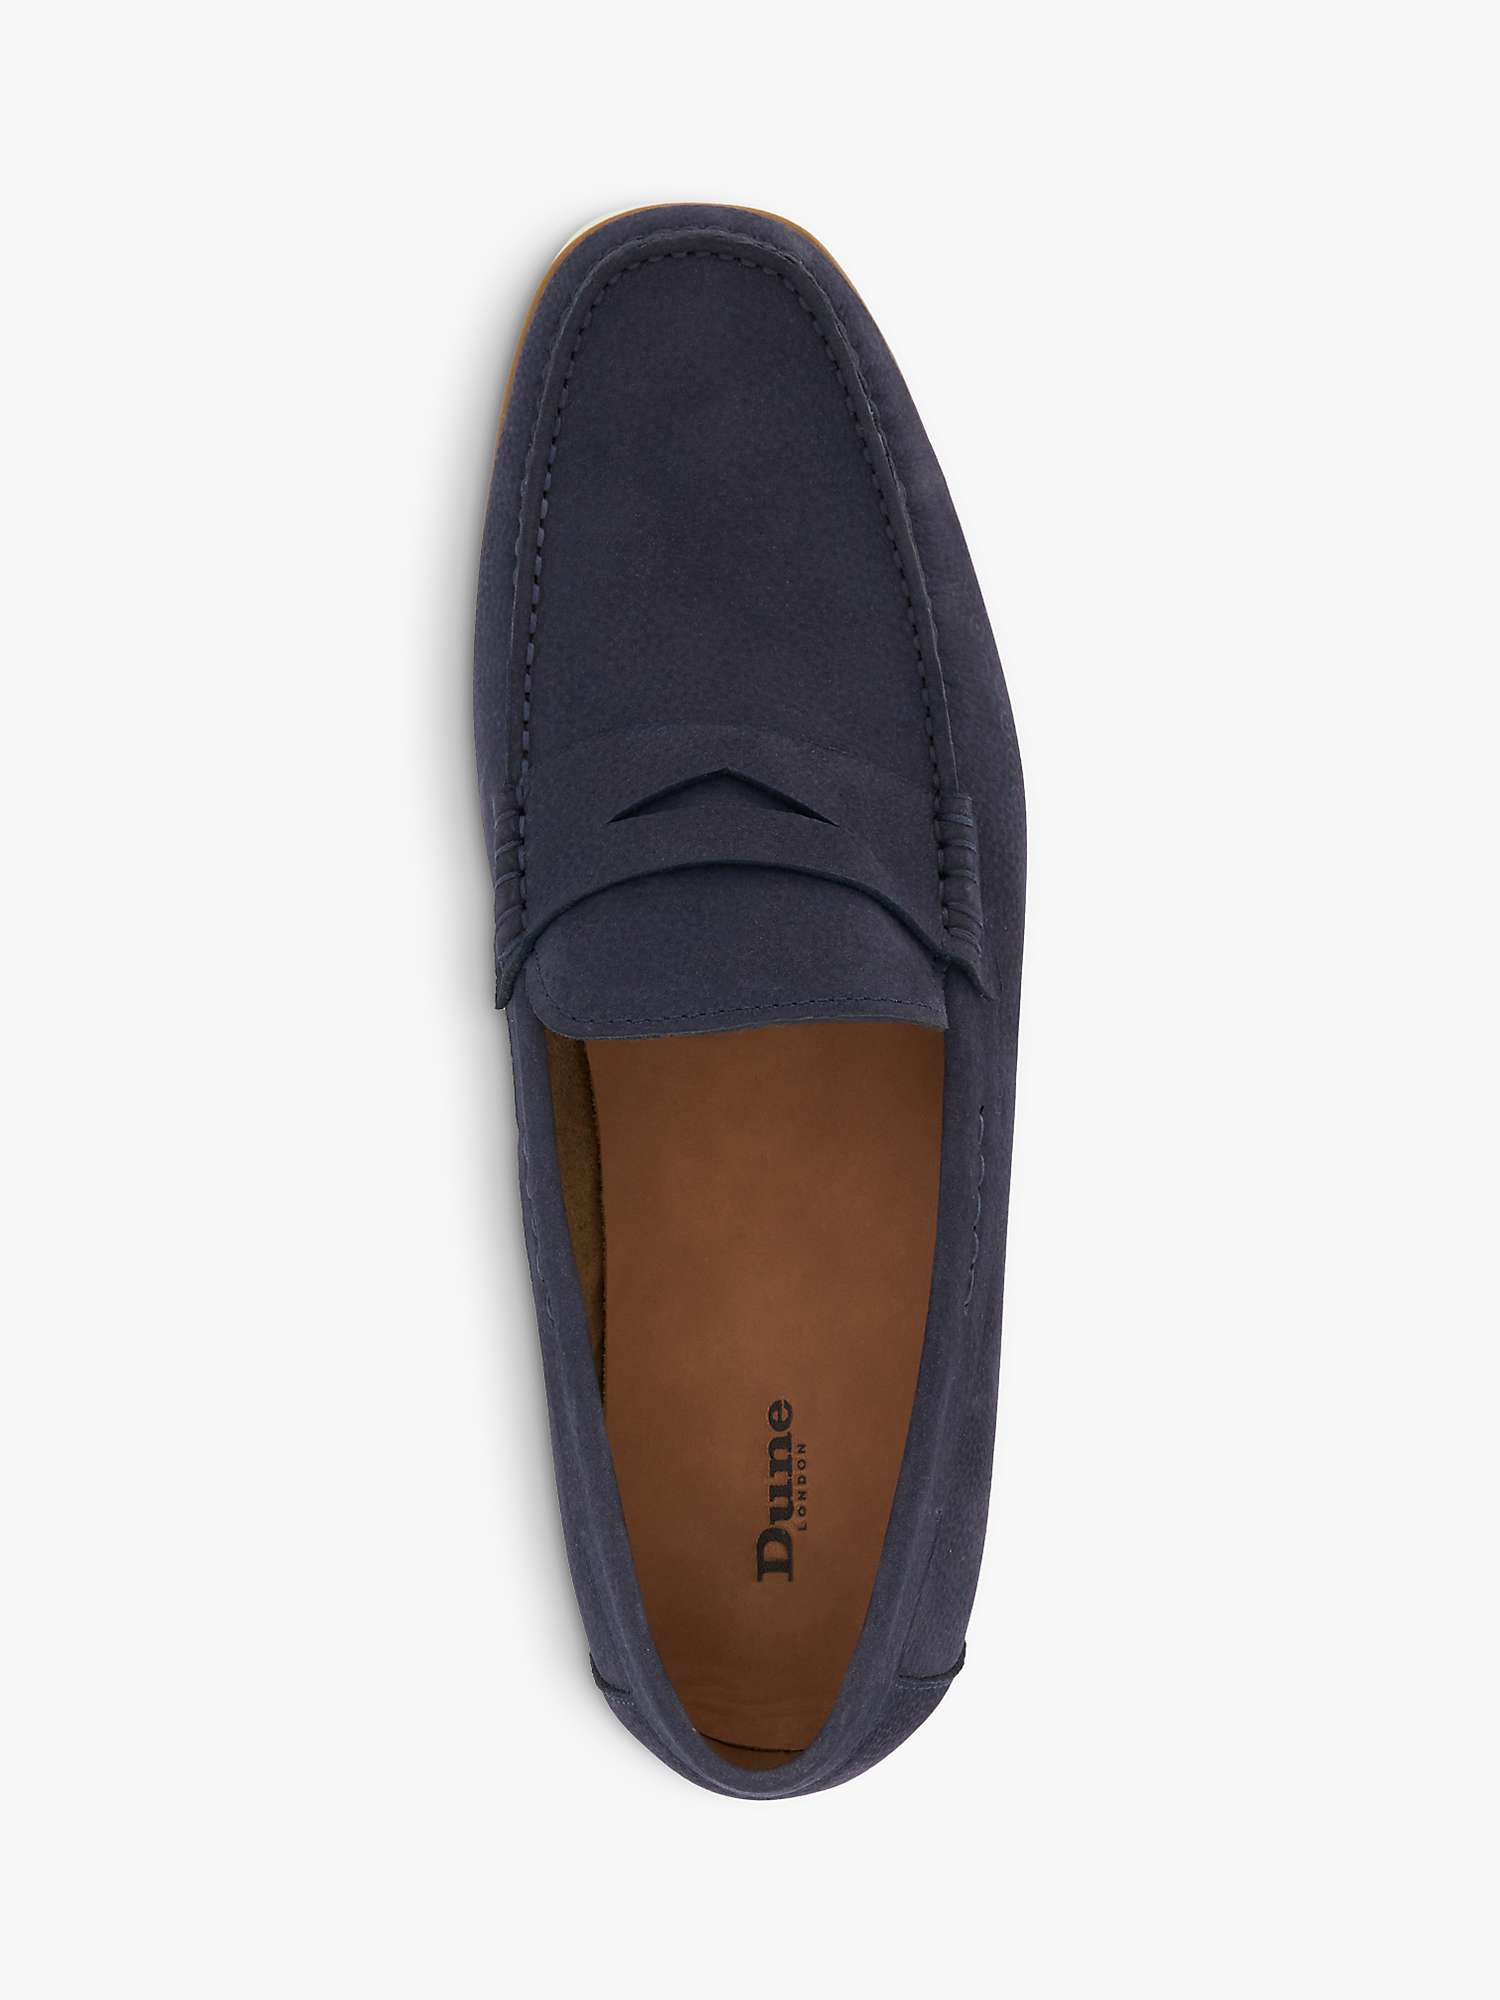 Buy Dune Wide Fit Berkly Nubuck White Sole Loafers, Navy Online at johnlewis.com